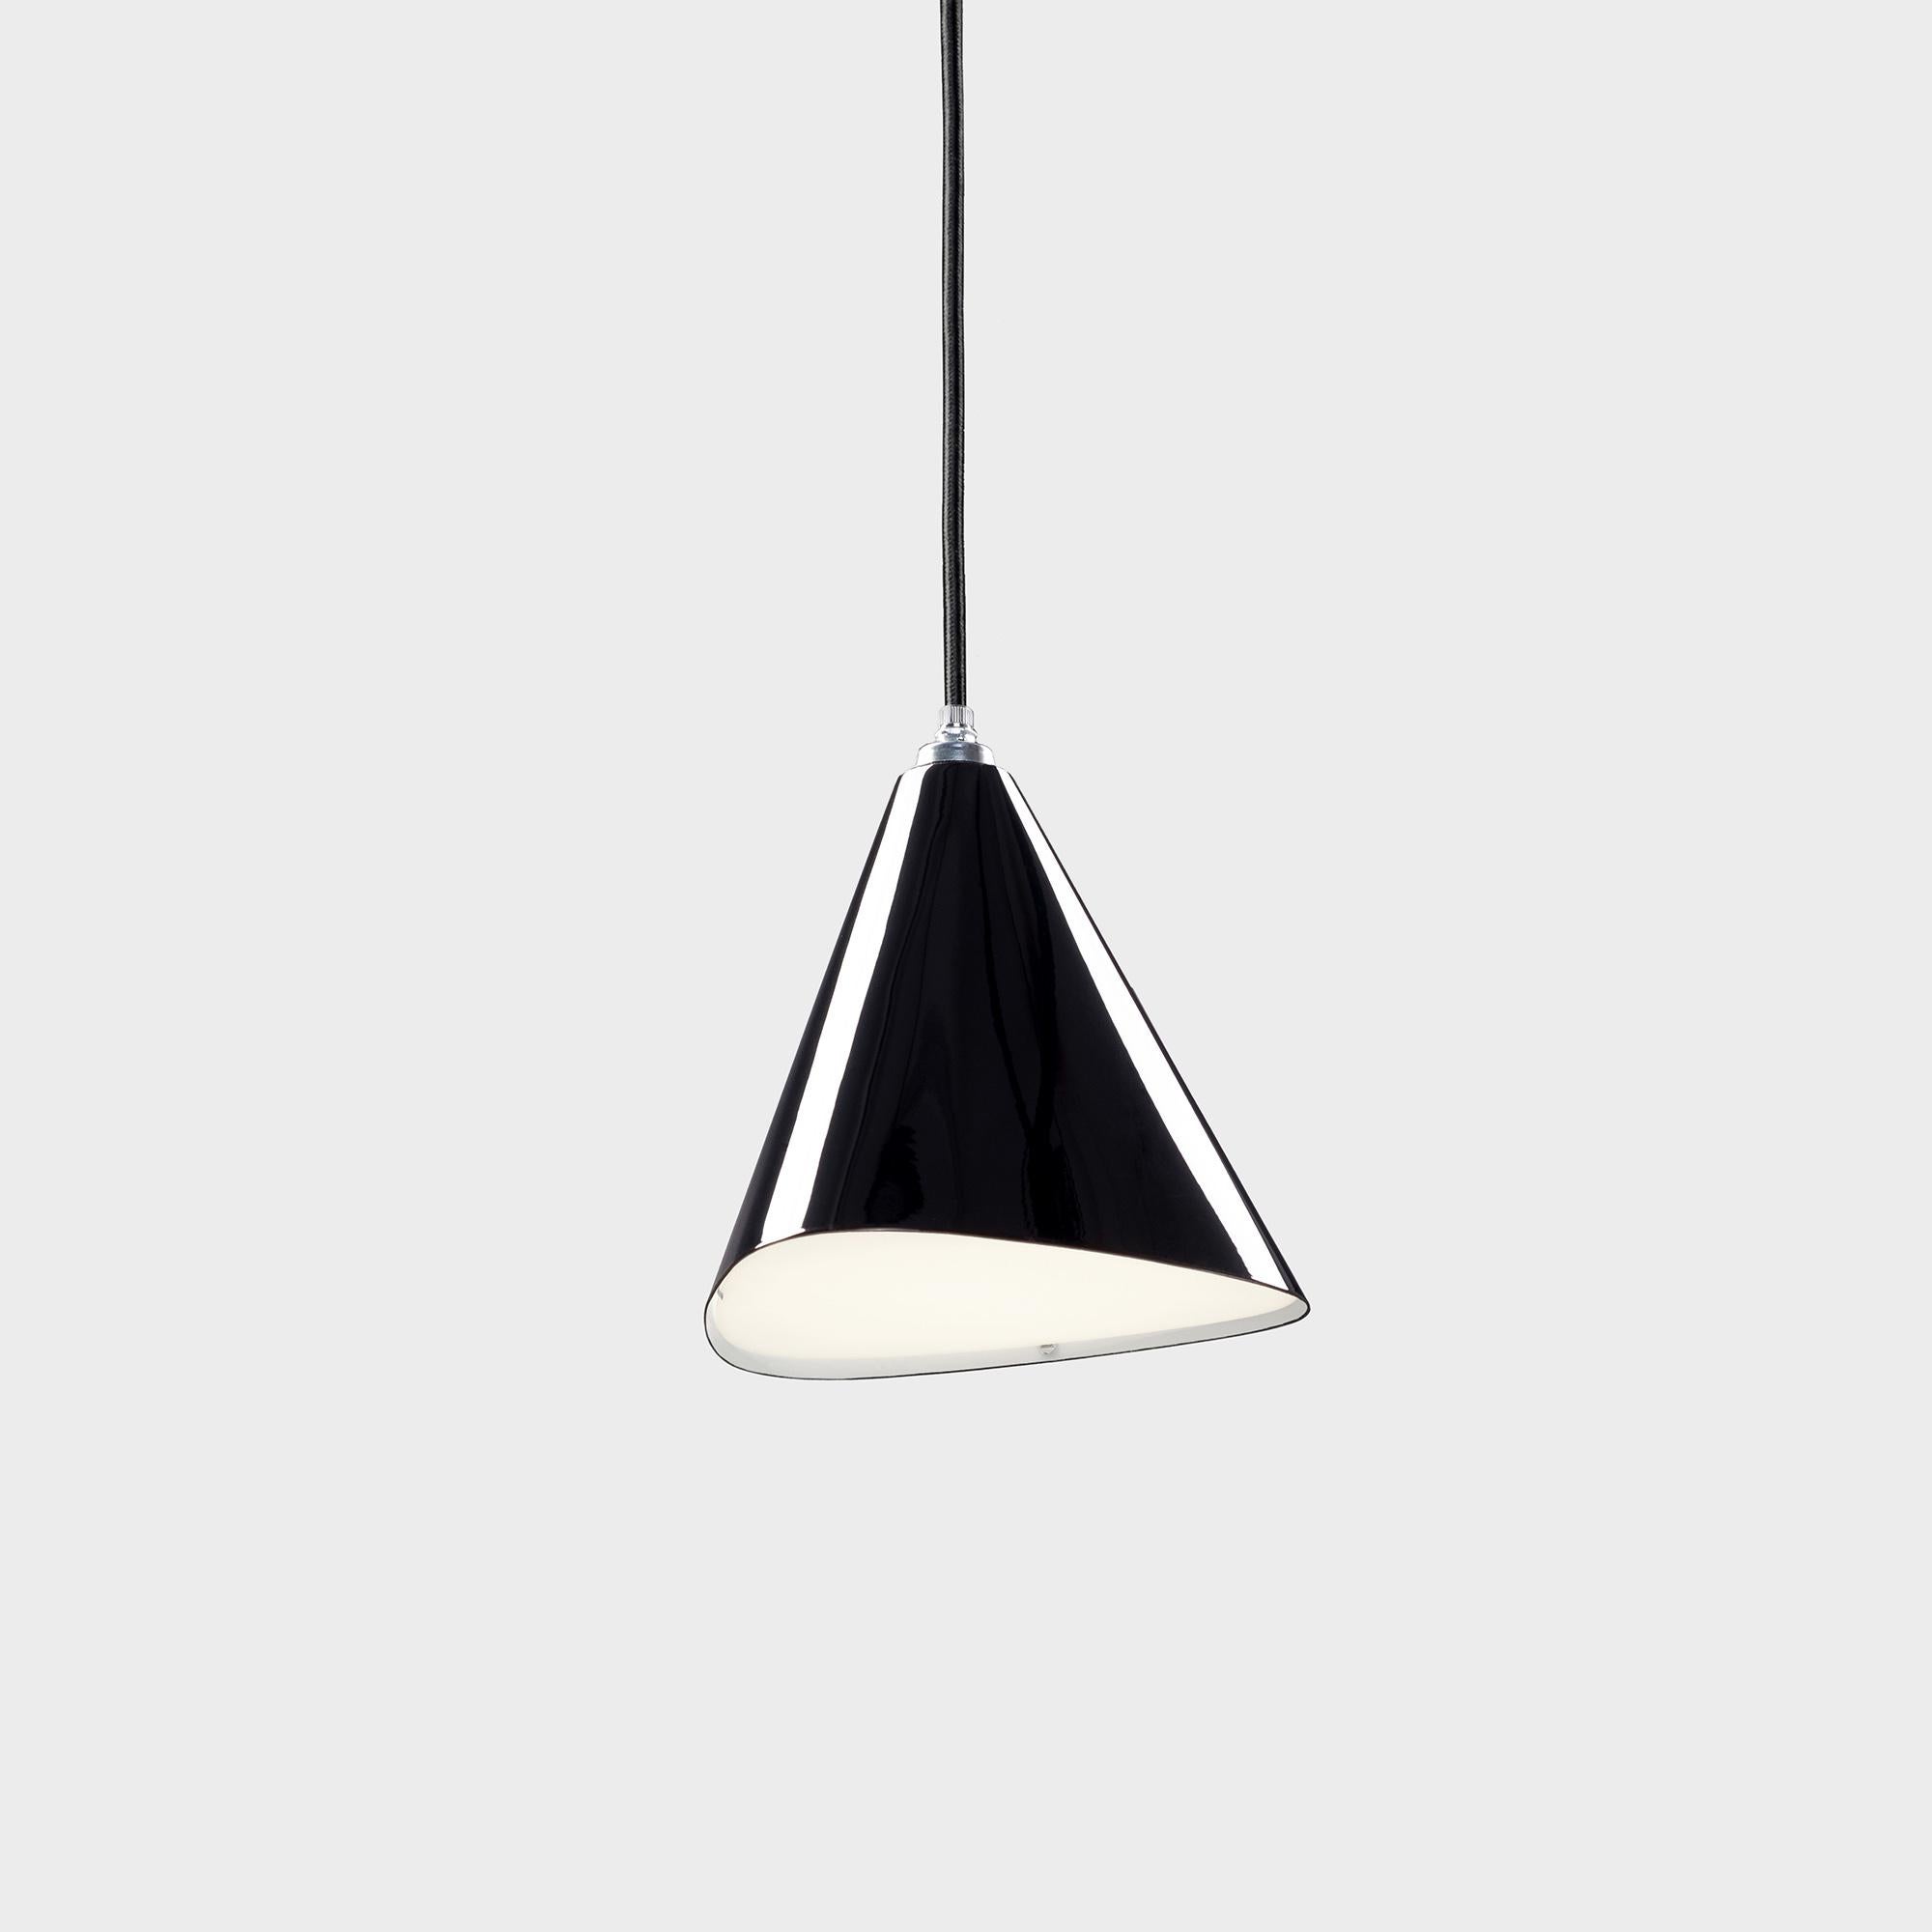 Daniel Becker 'Emily III' pendant lamp in gloss black for Moss Objects. Designed by Berlin luminary Daniel Becker and handmade to order using mid-century manufacturing techniques. Executed in high-quality sheet metal with up to ten layers glossy or